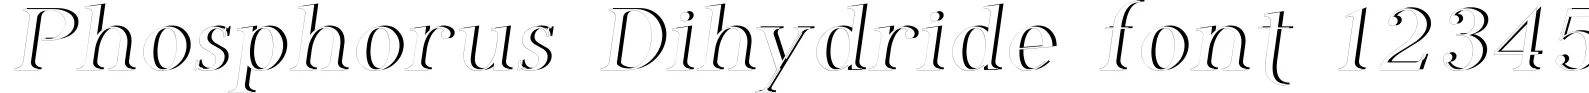 Dynamic Phosphorus Dihydride Font Preview https://safirsoft.com